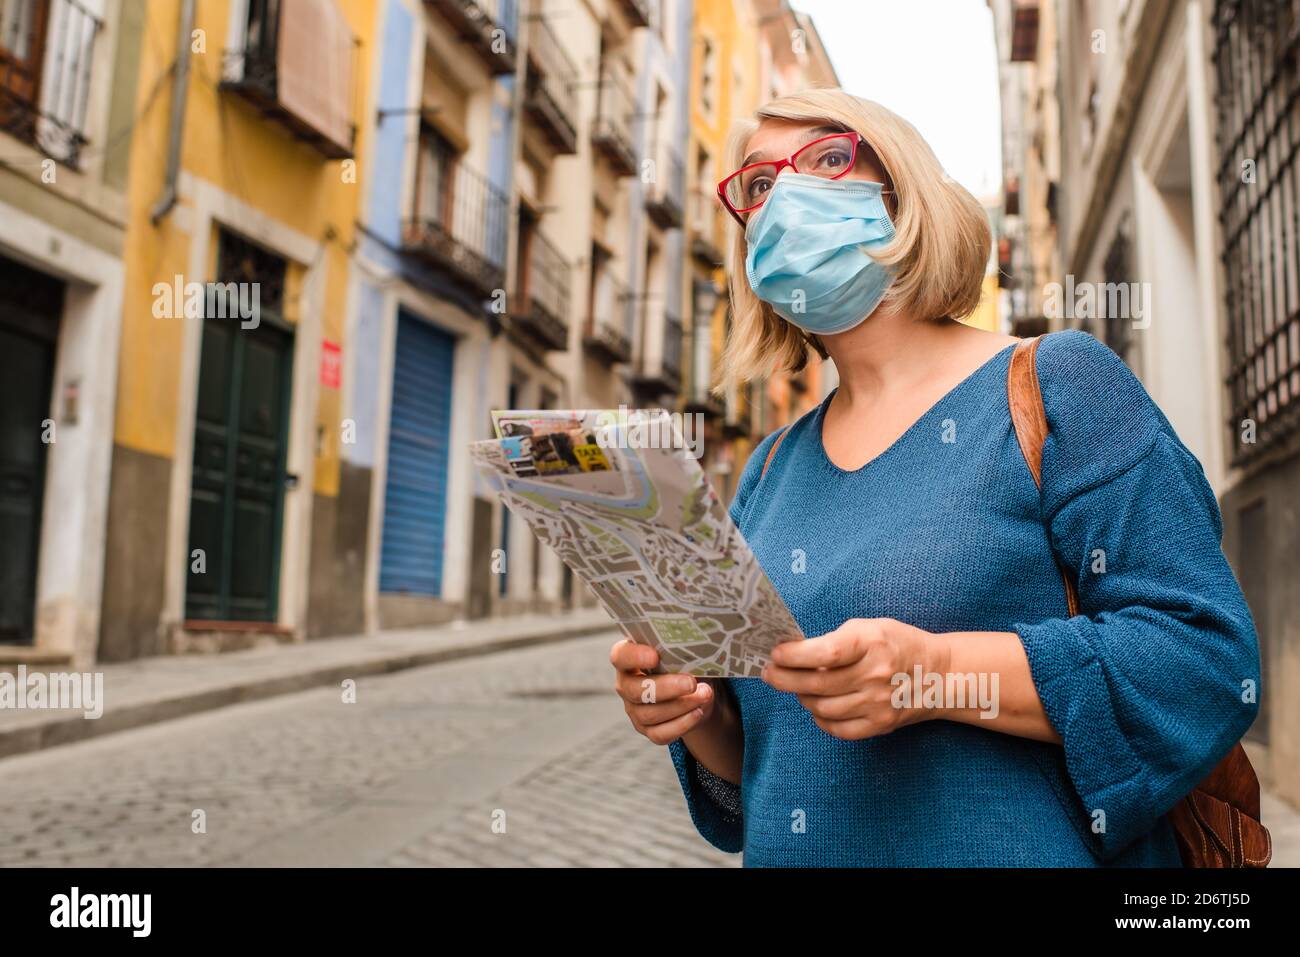 Low angle of female traveler in medical mask for coronavirus prevention holding touristic map and checking route while standing on narrow paved street Stock Photo